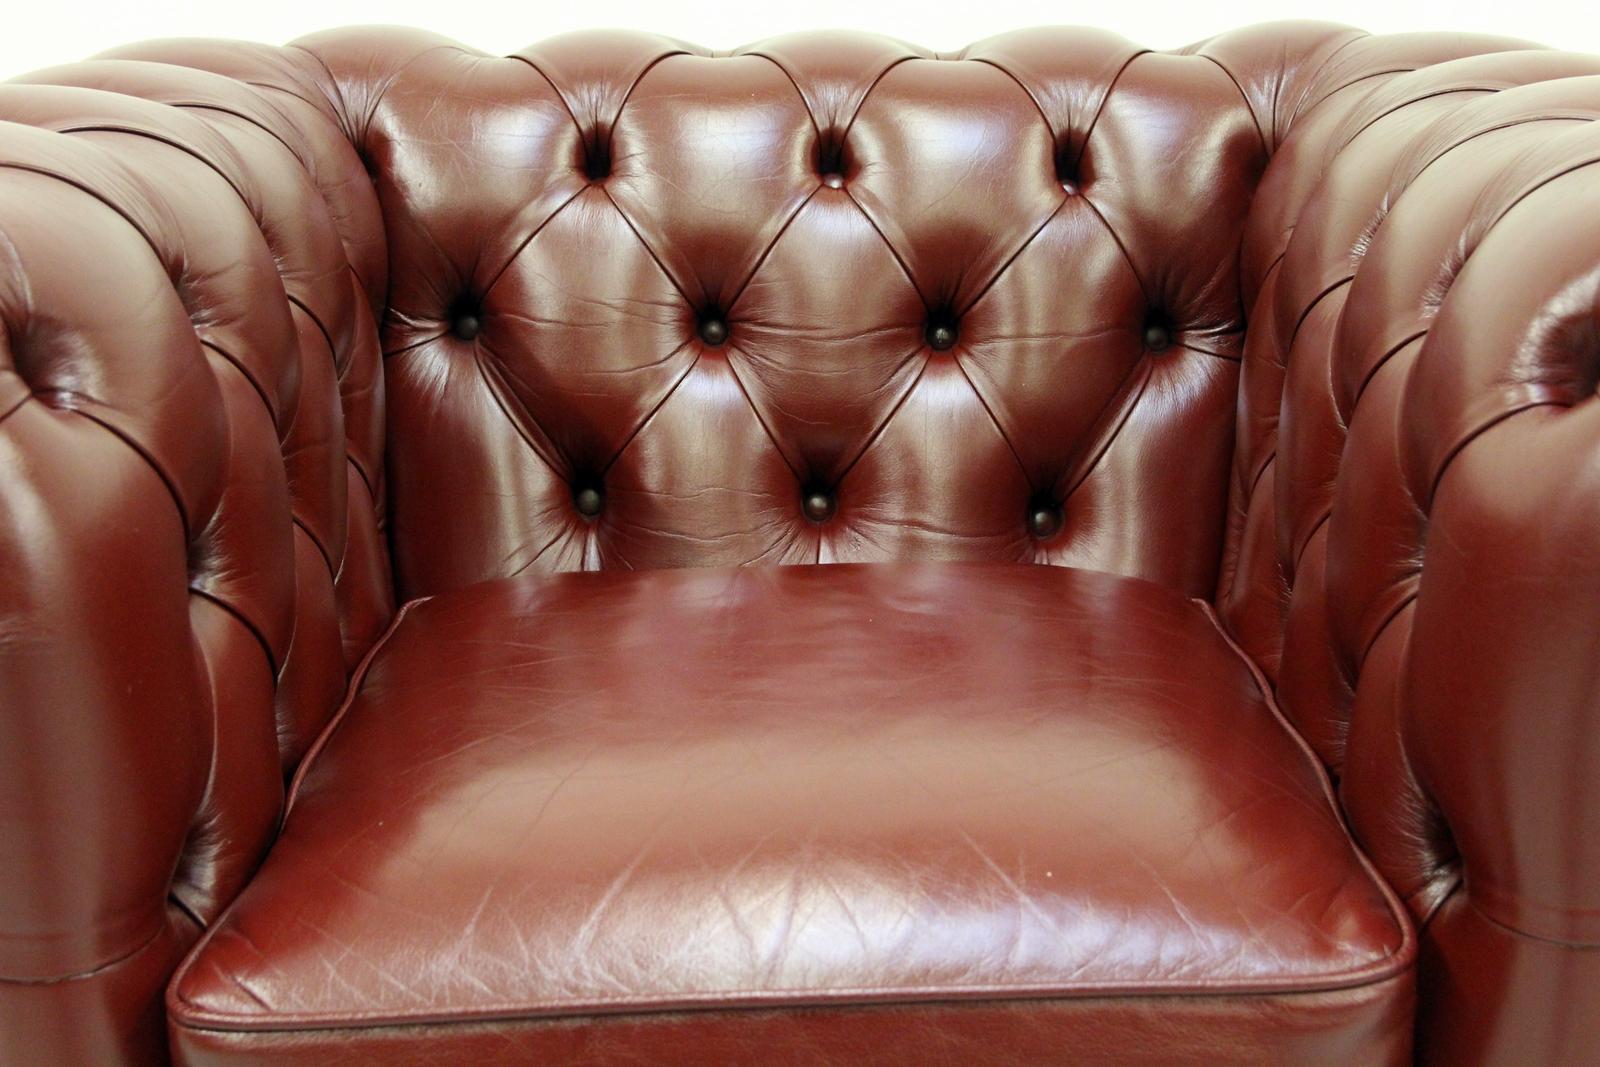 Chesterfield real leather armchair
in original design

Condition: The chair is in a very good condition
Armchair
Height 72cm, length 105cm, depth 90cm
Upholstery is in a very good condition with beautiful patina (see photos).
Color: Oxblood /